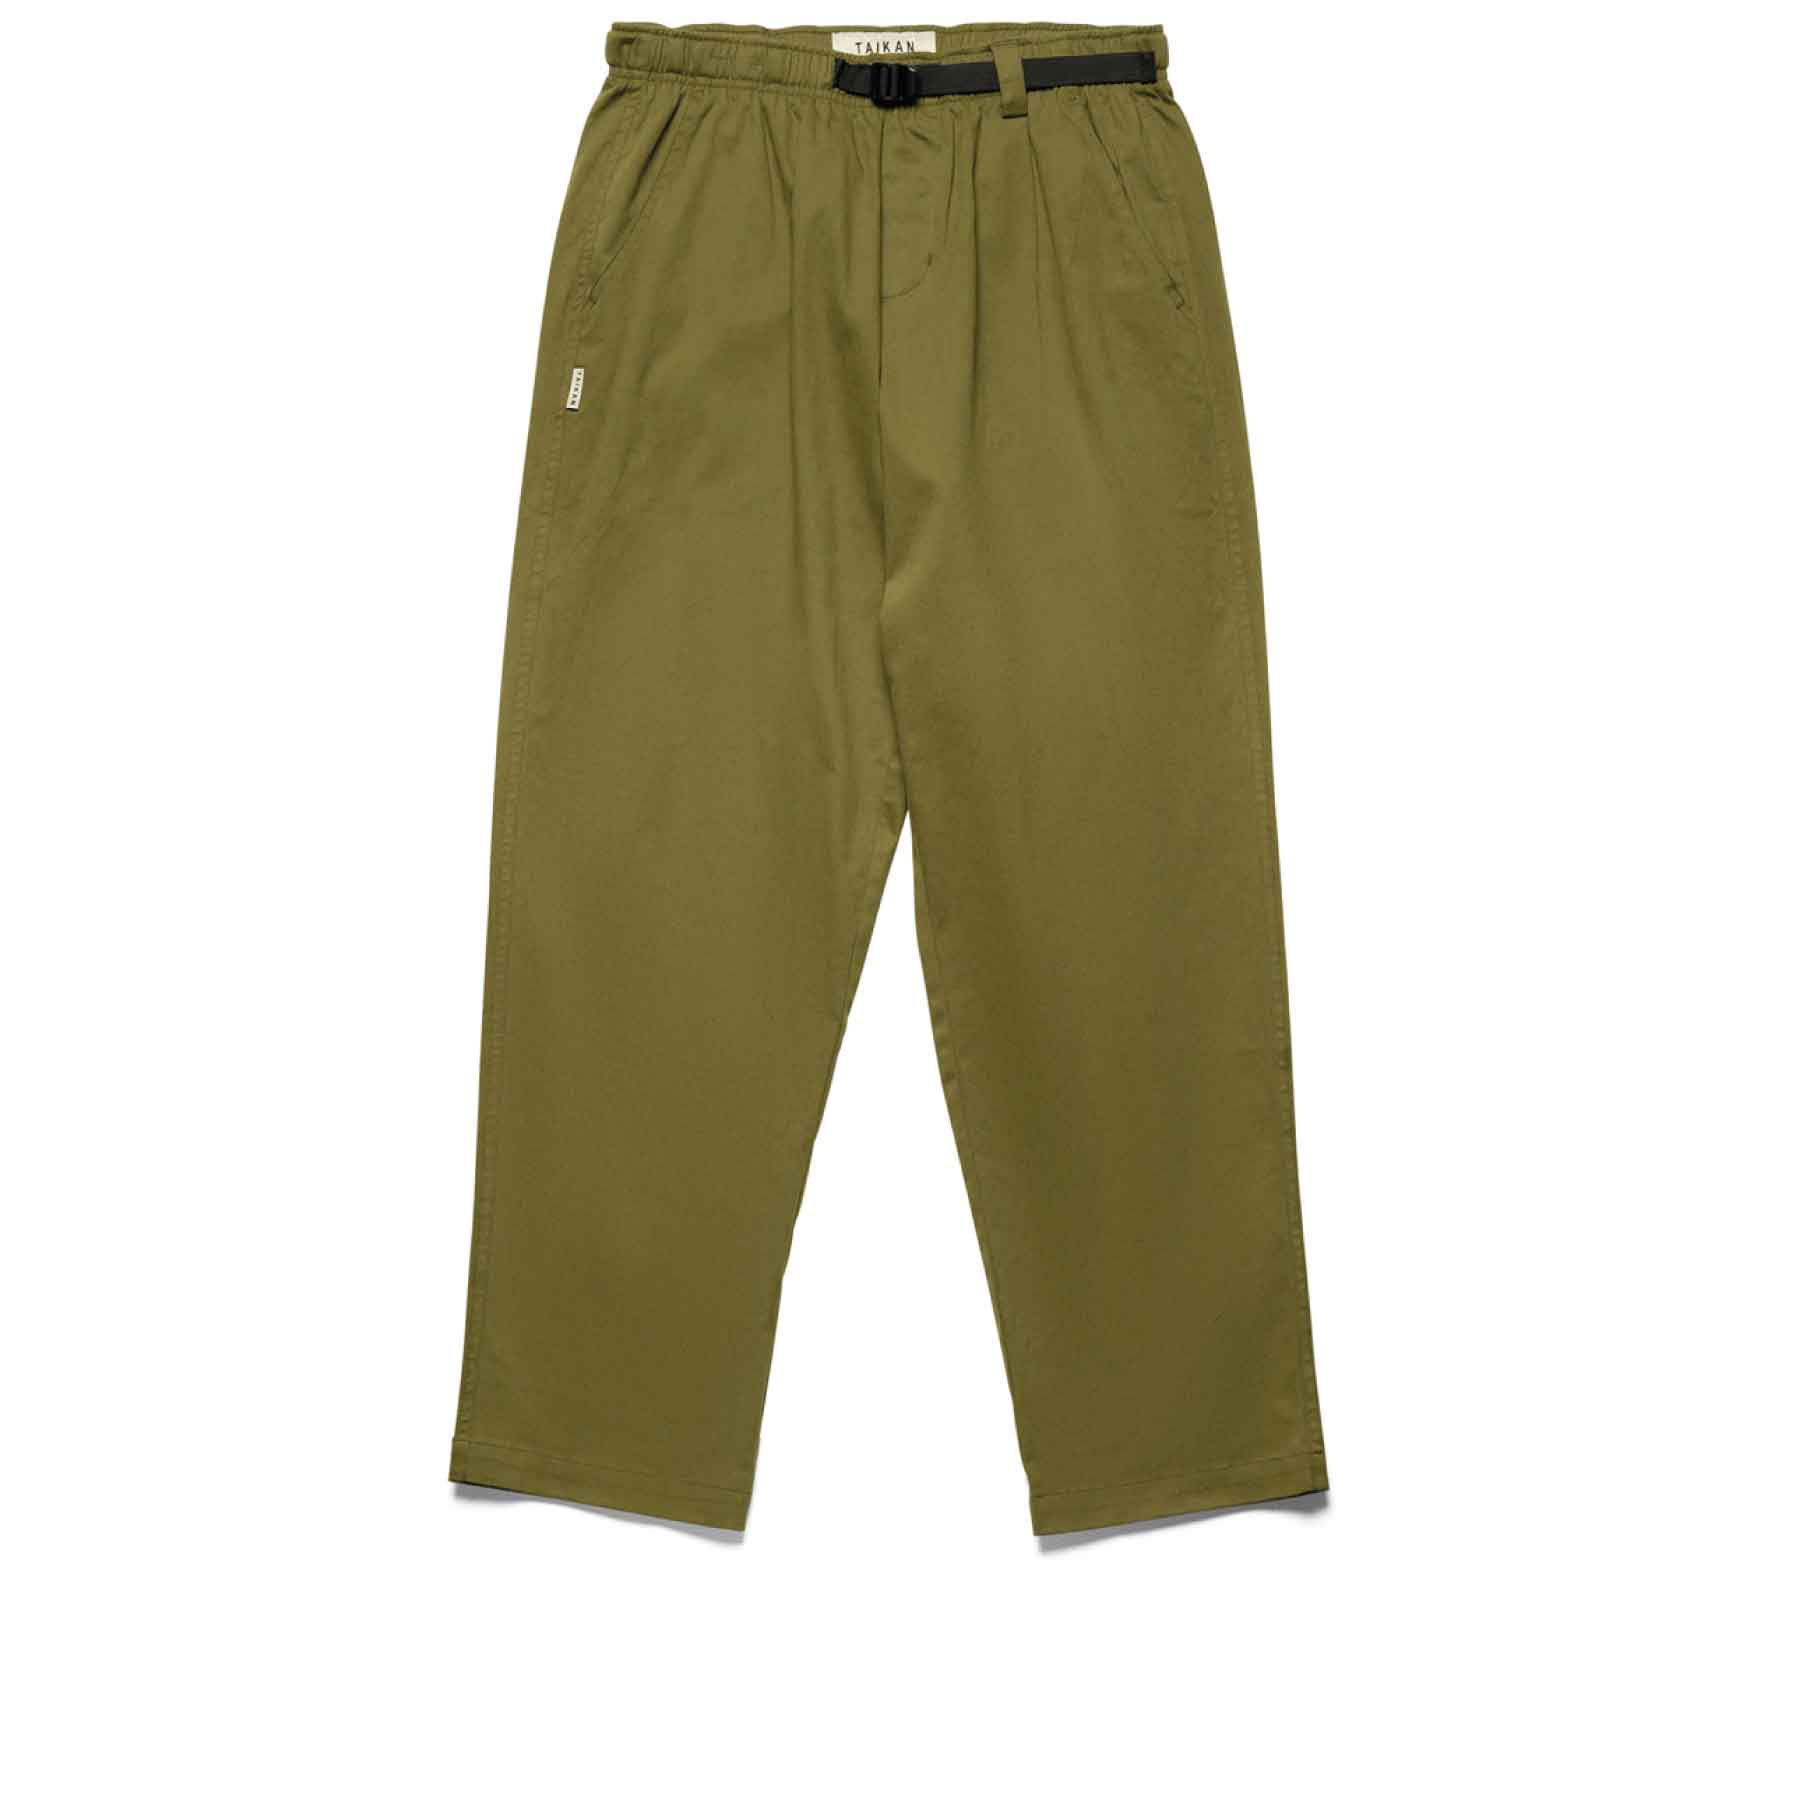 Chiller Pant Olive Twill